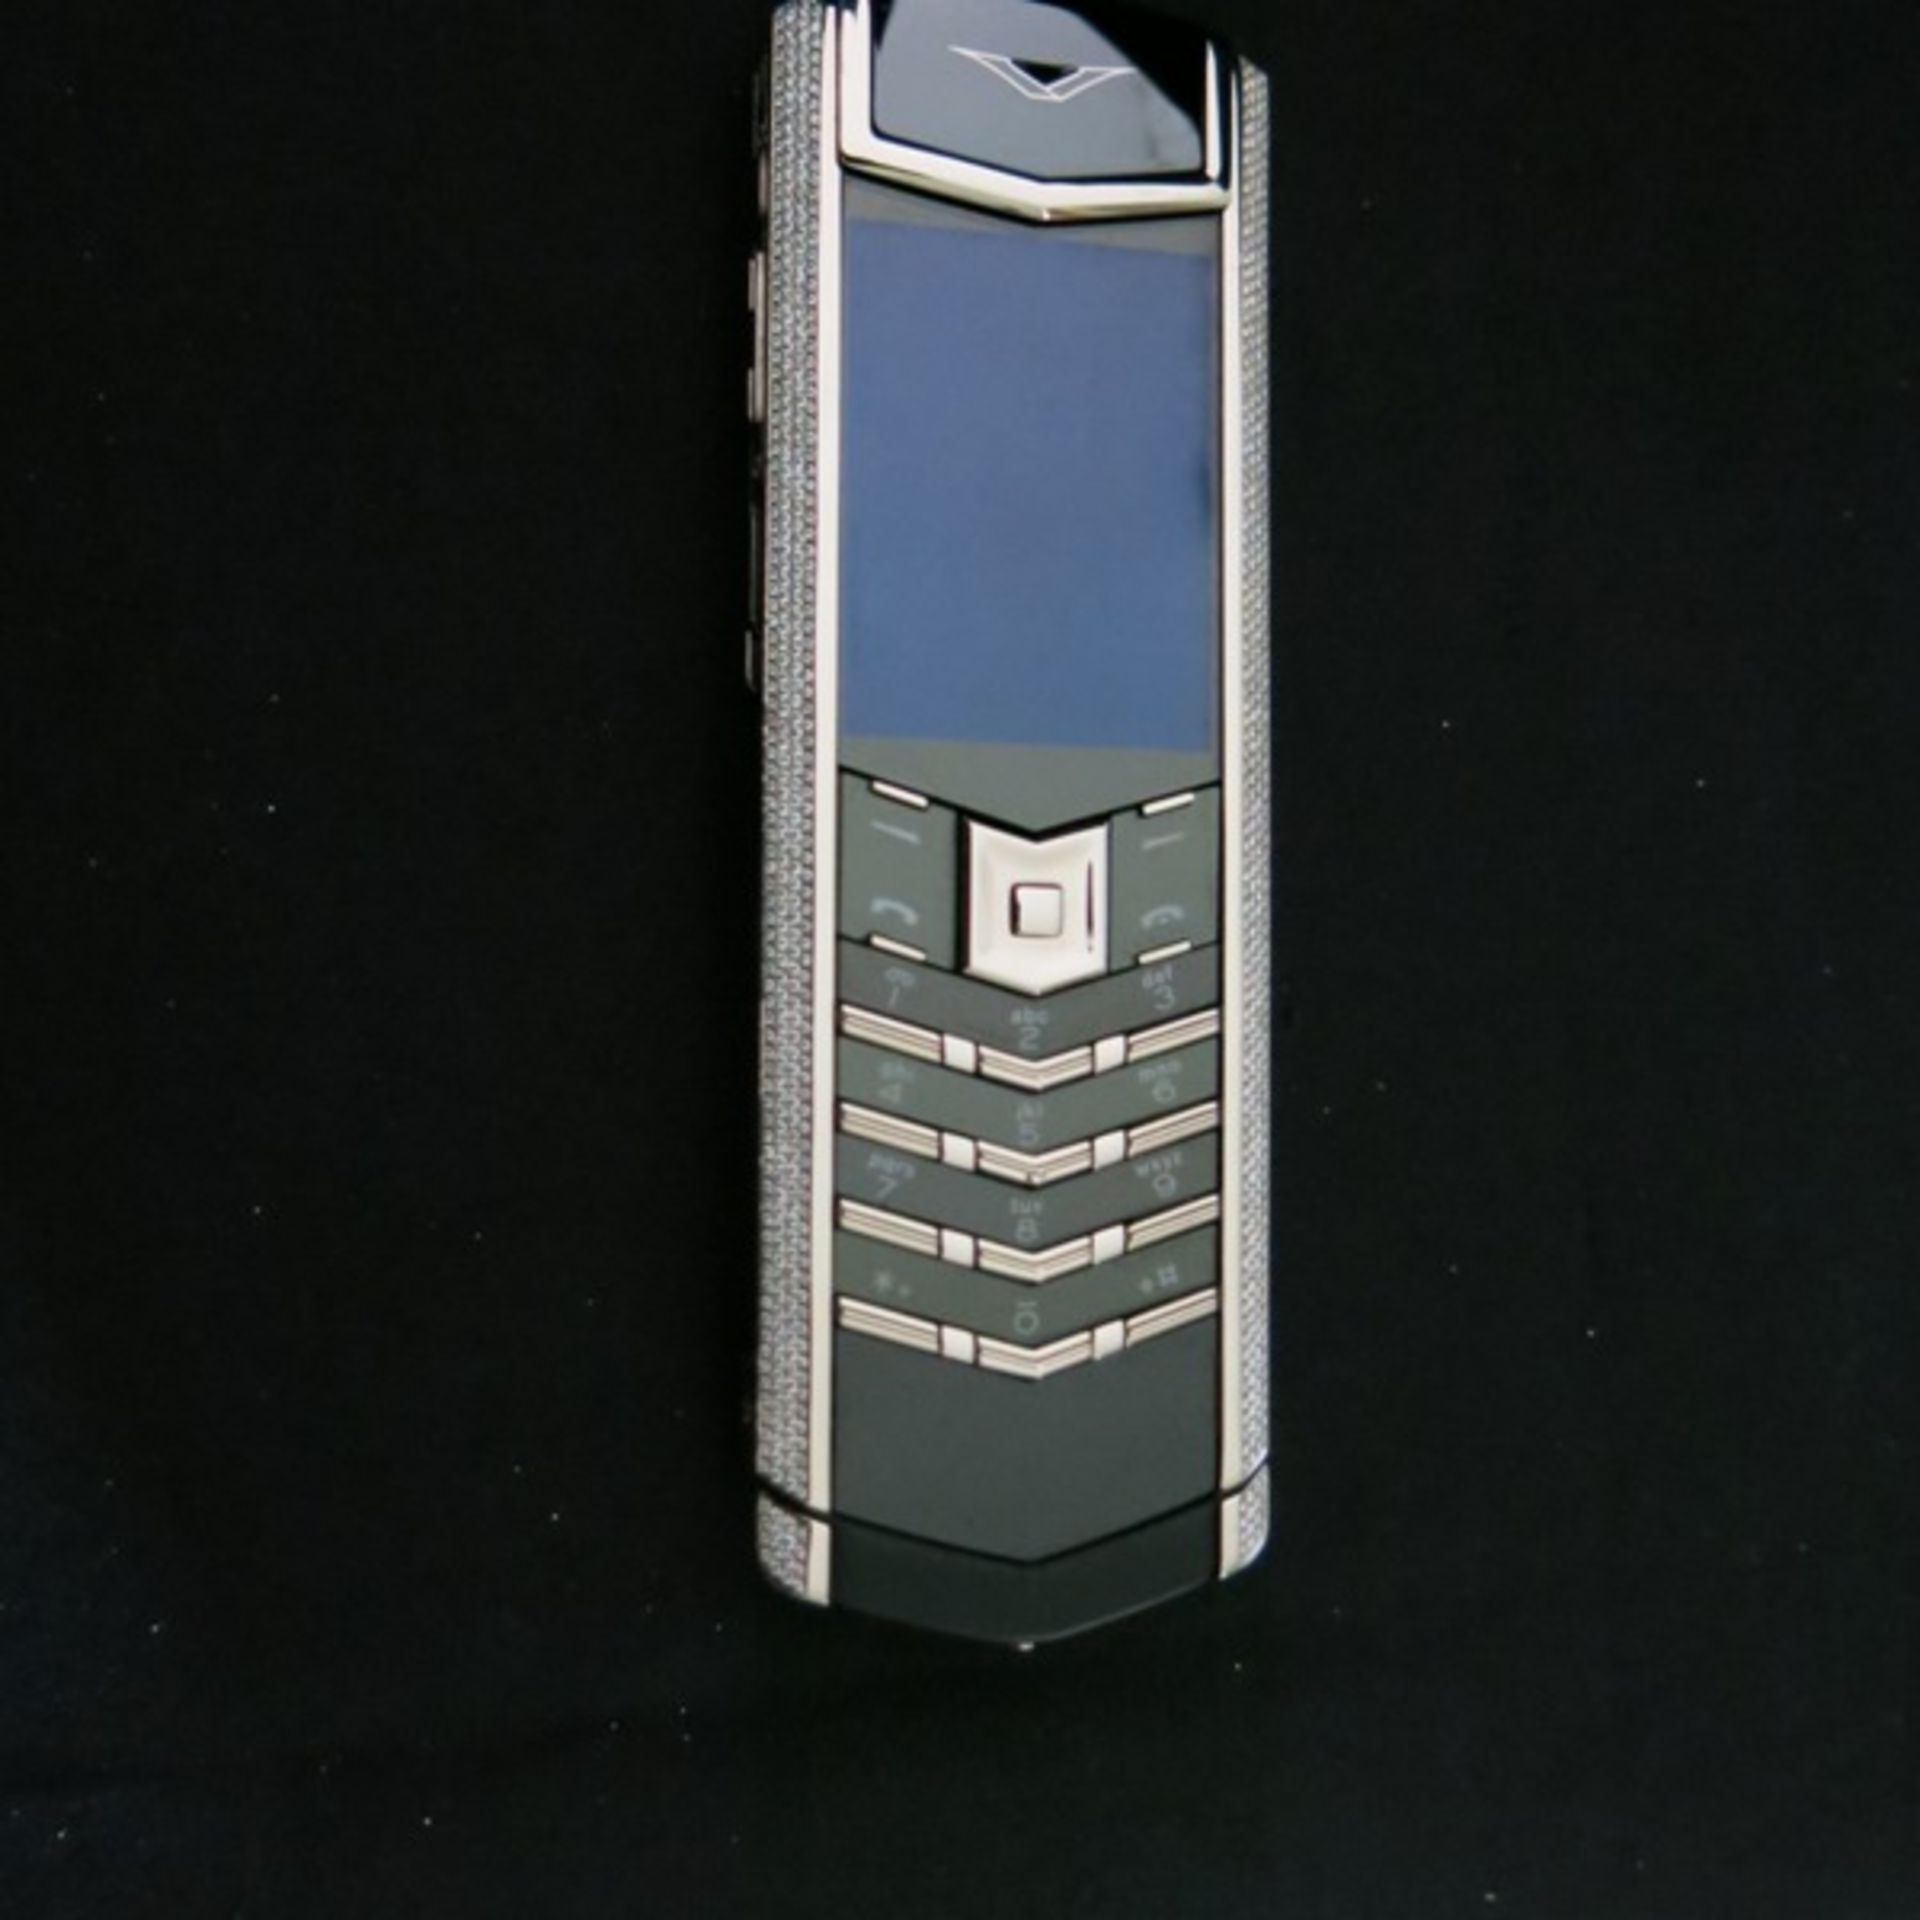 Vertu 18kt White Gold Signature S Phone with White Gold Pave Diamond Side Cheeks & IHF Ports.